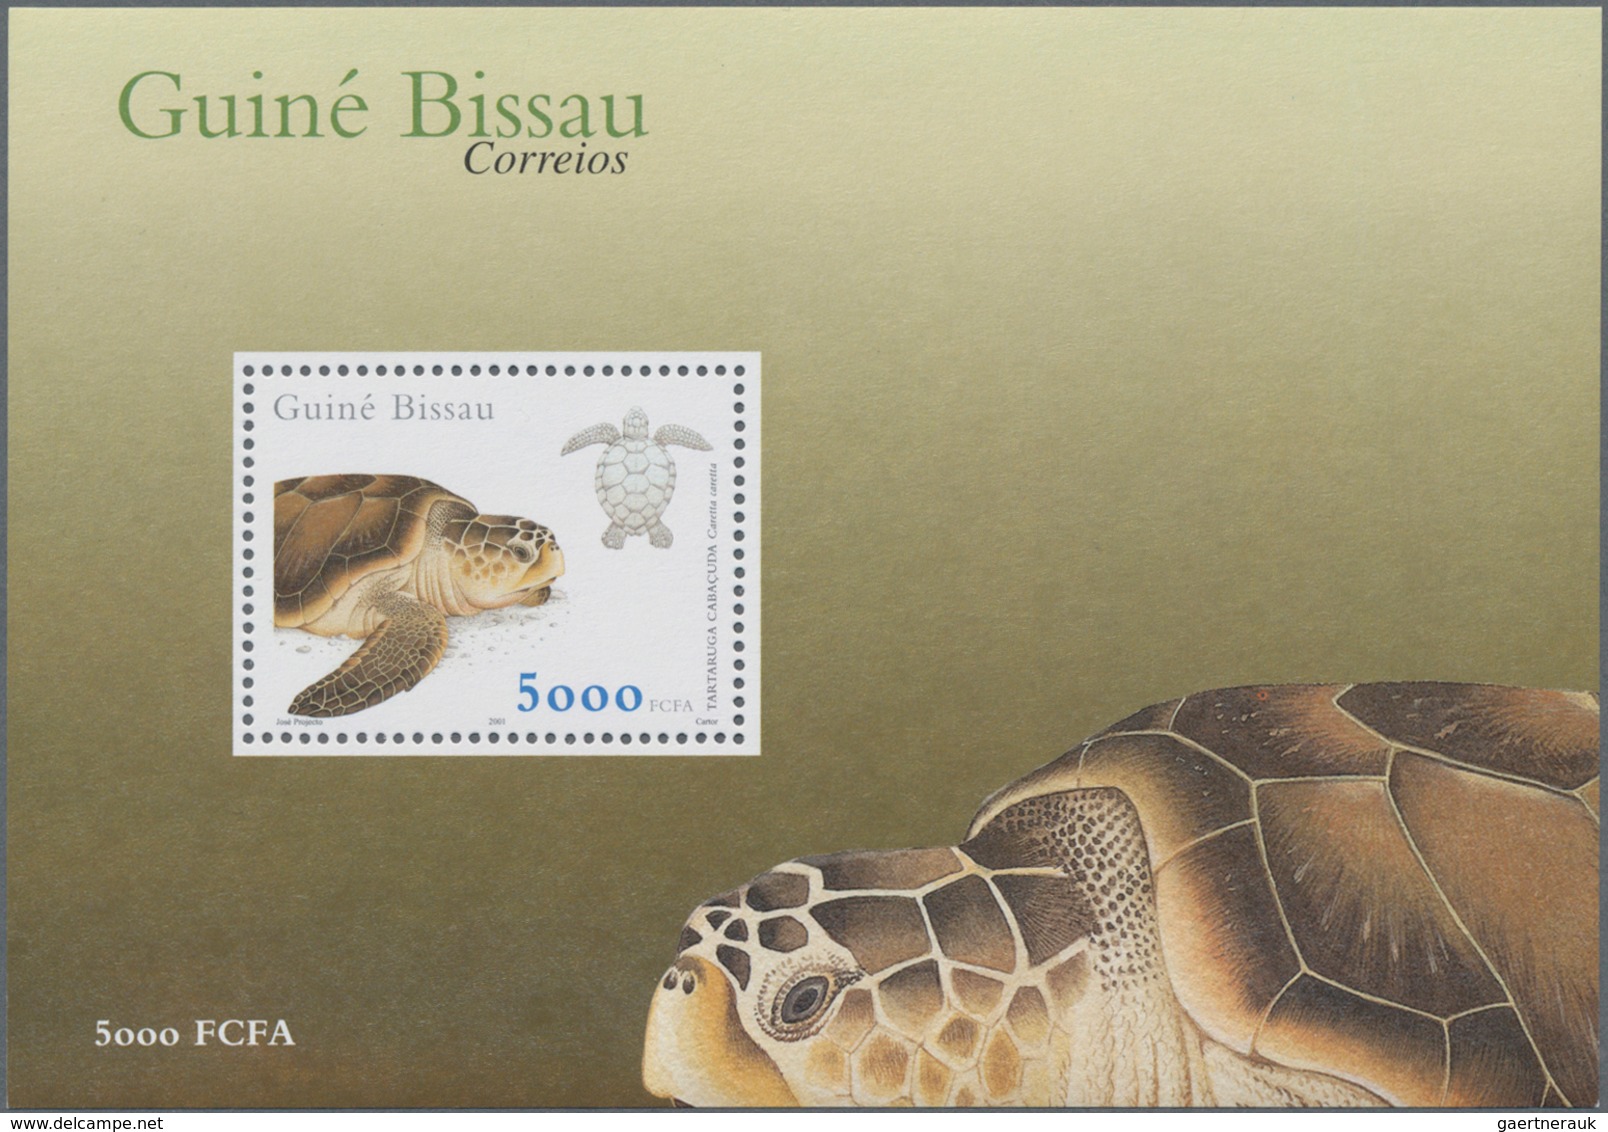 Guinea-Bissau: 2001, SEA TURTLES, Souvenir Sheet, Investment Lot Of 1000 Copies Mint Never Hinged (M - Guinea-Bissau